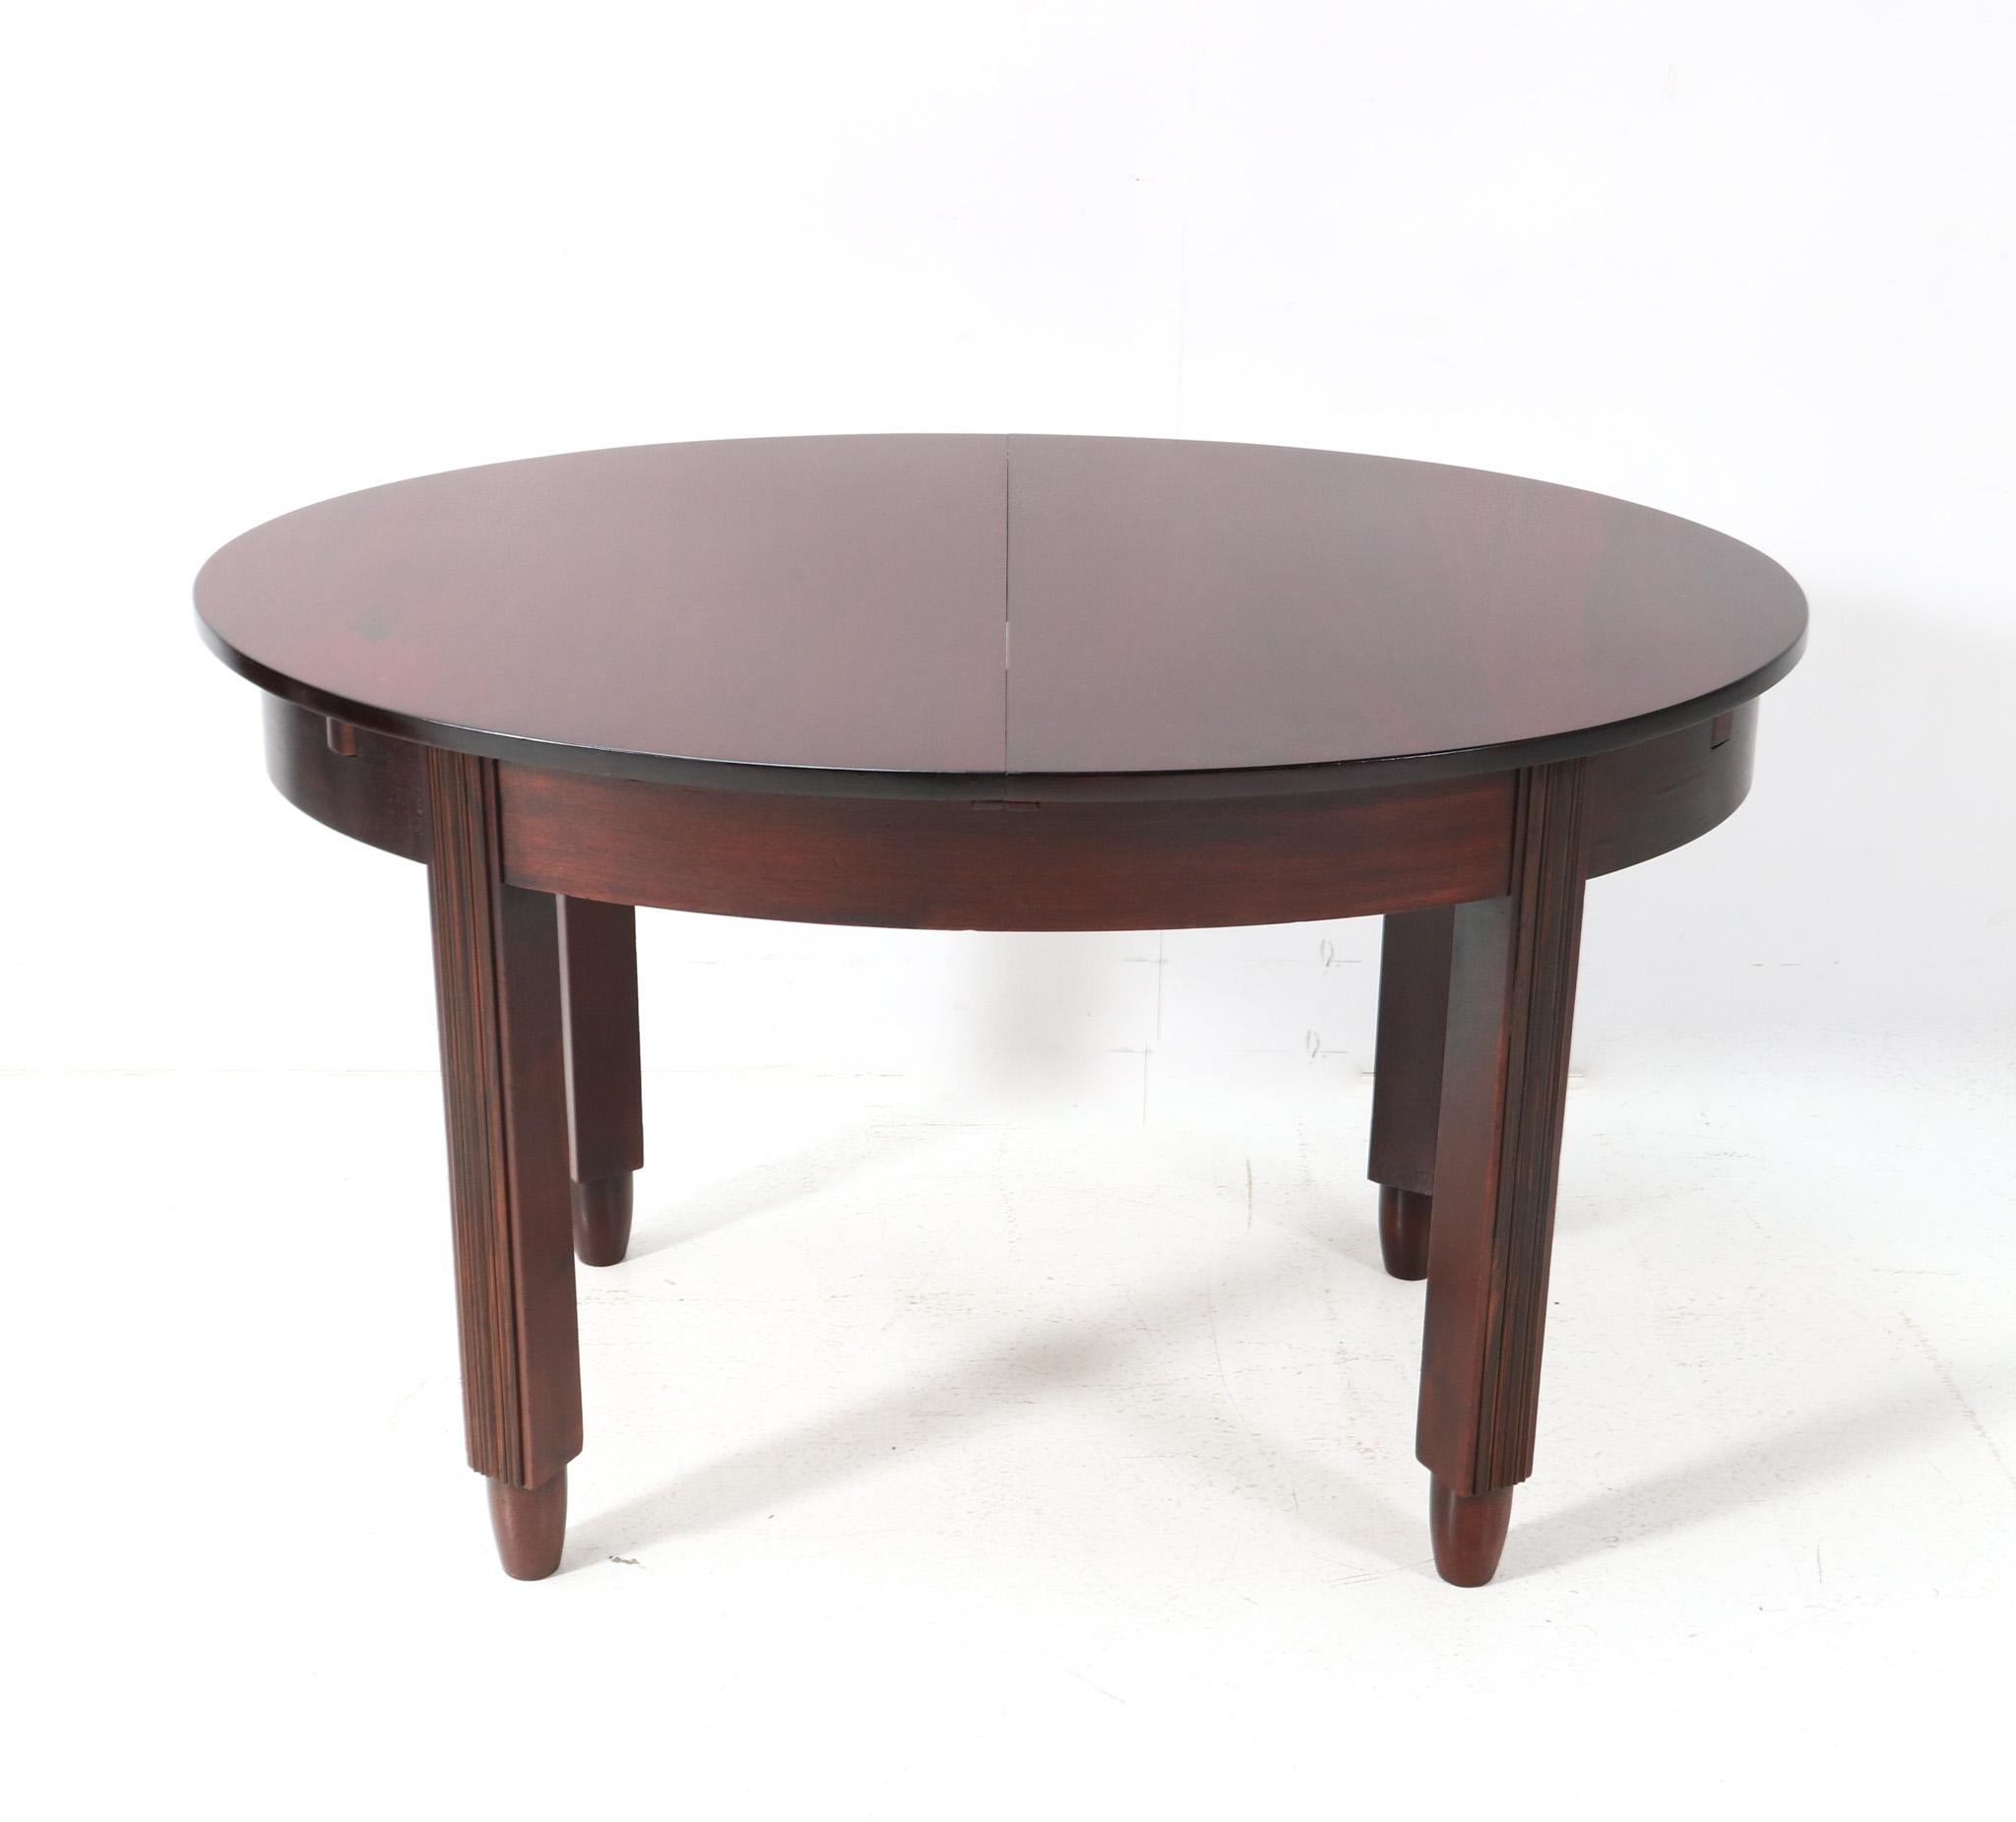 Dutch Walnut Art Deco Amsterdamse School Extendable Dining Room Table by Fa. Drilling For Sale